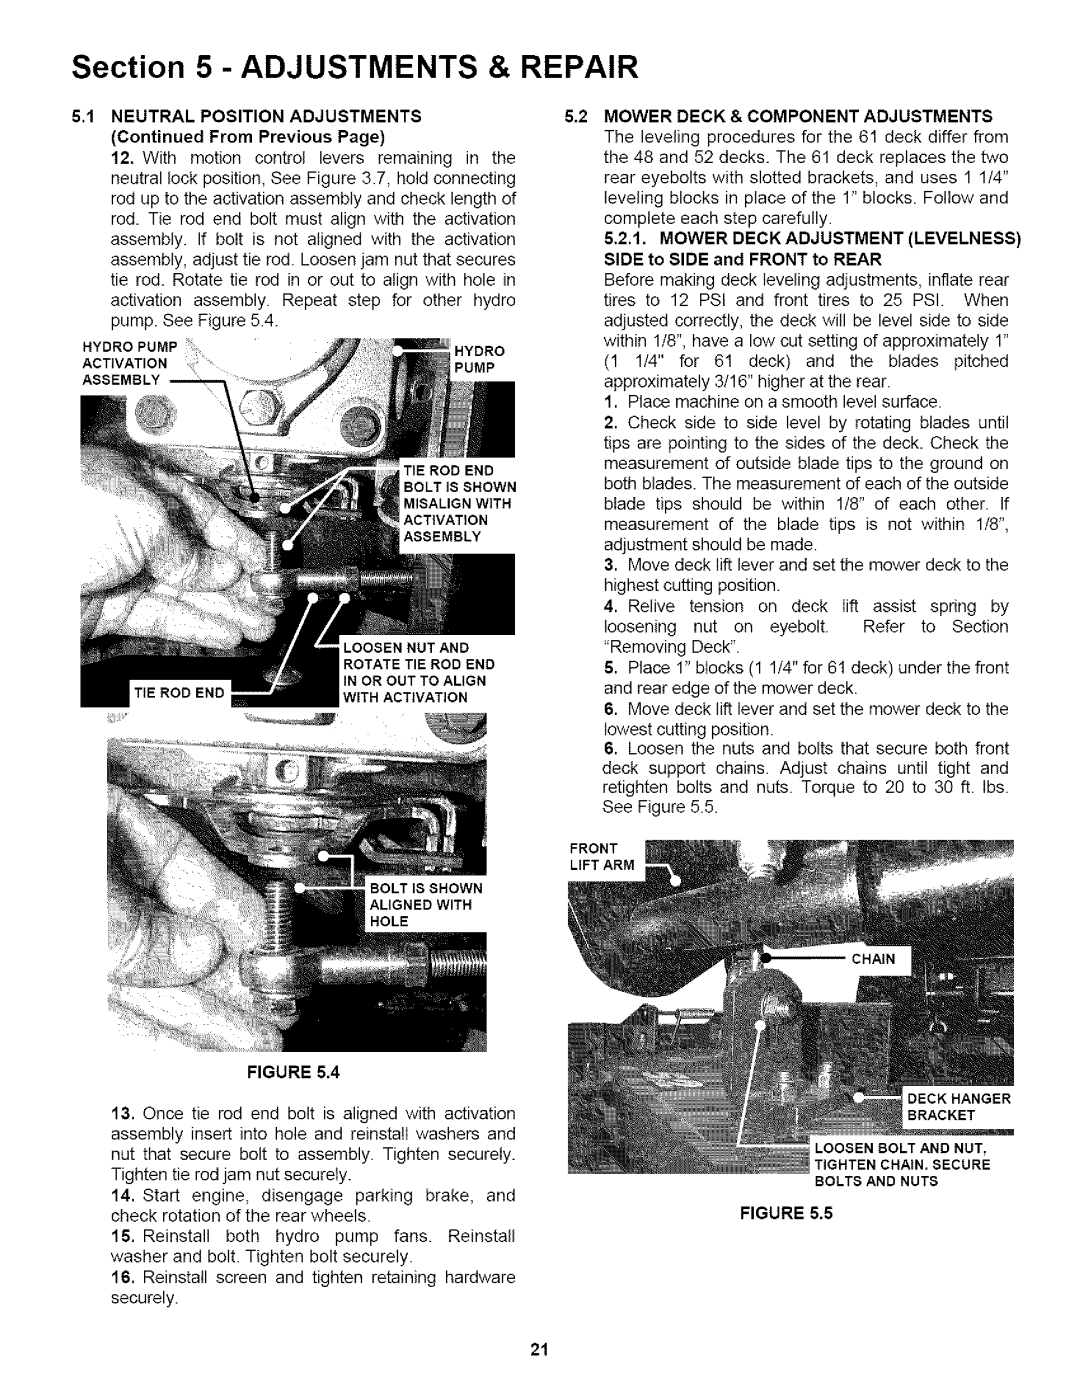 Snapper NZM21523KWV Section, Adjustments, Repair, Neutral, Position, Mower Deck & Component, Continued From, Previous Page 